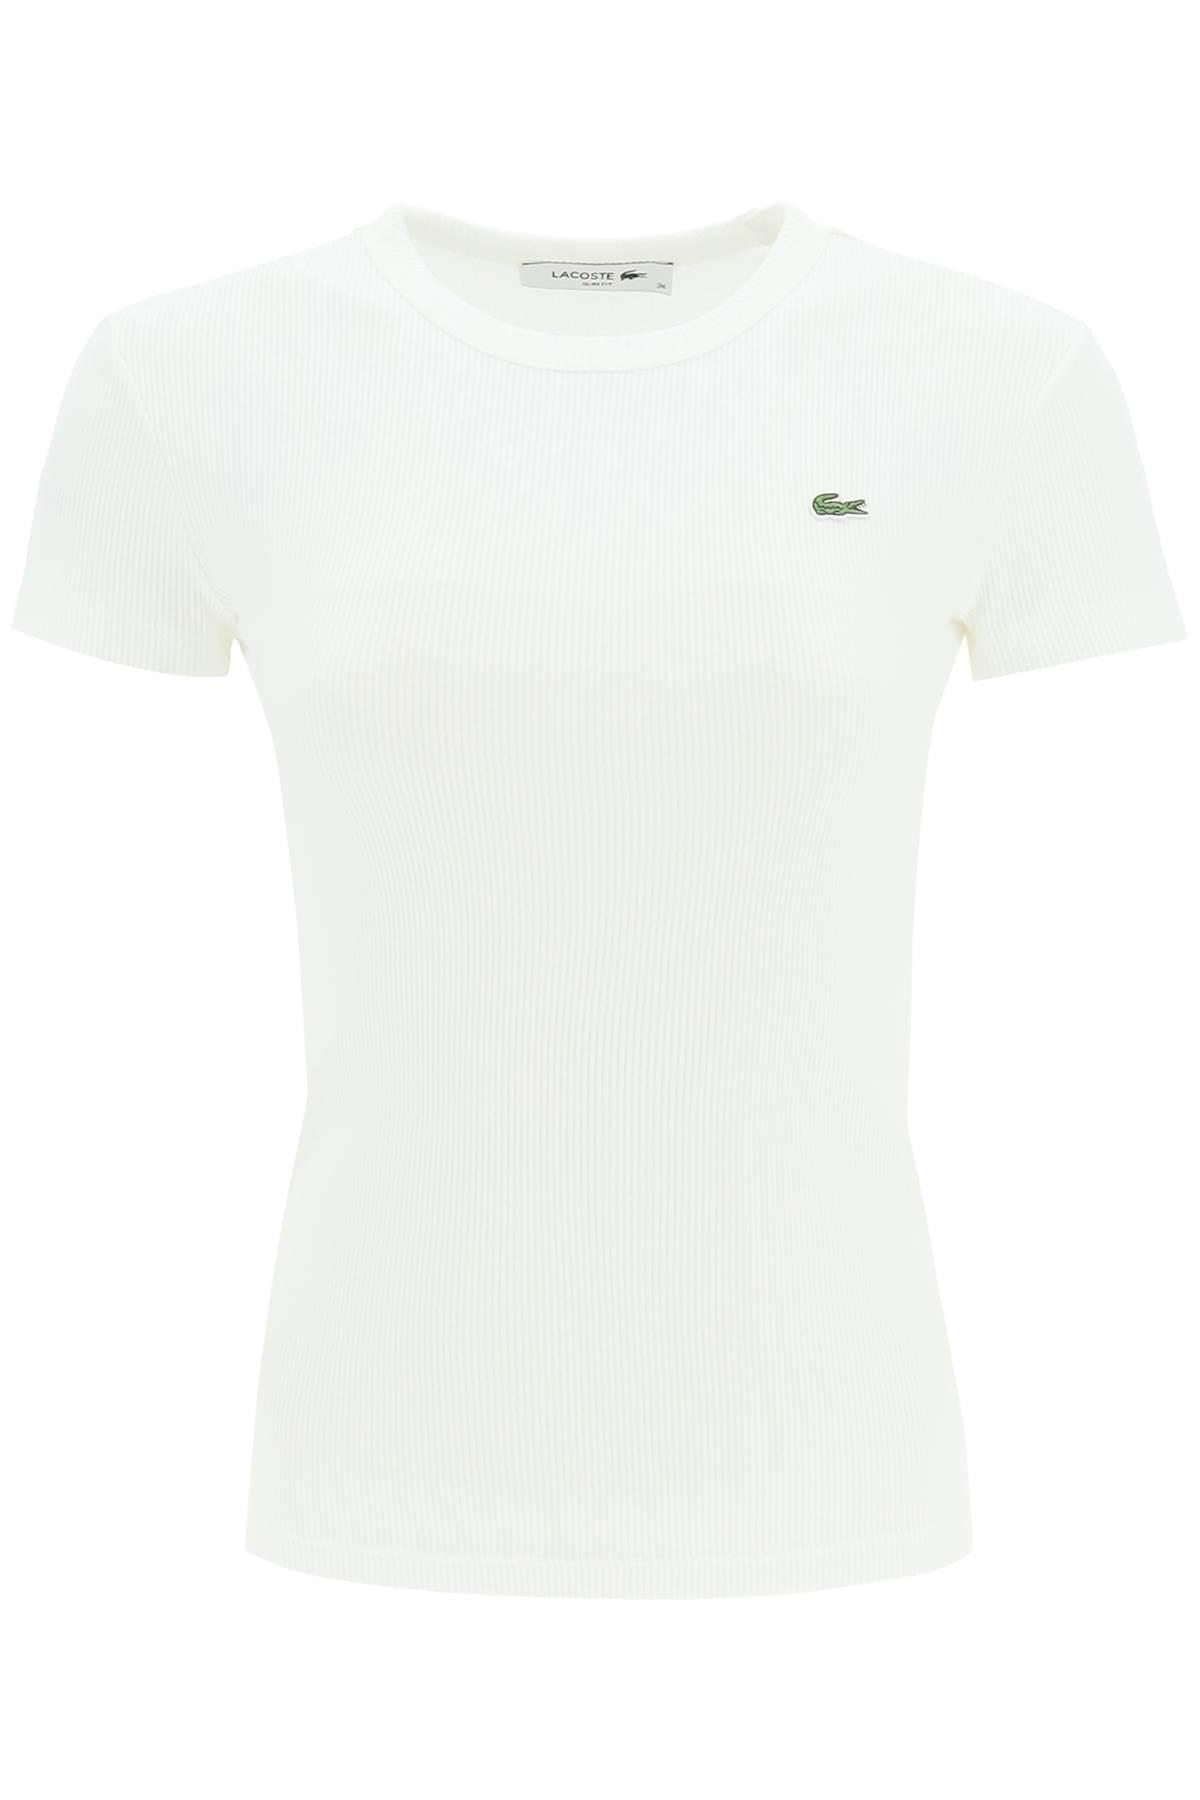 Lacoste Ribbed Organic Cotton T-shirt in White | Lyst